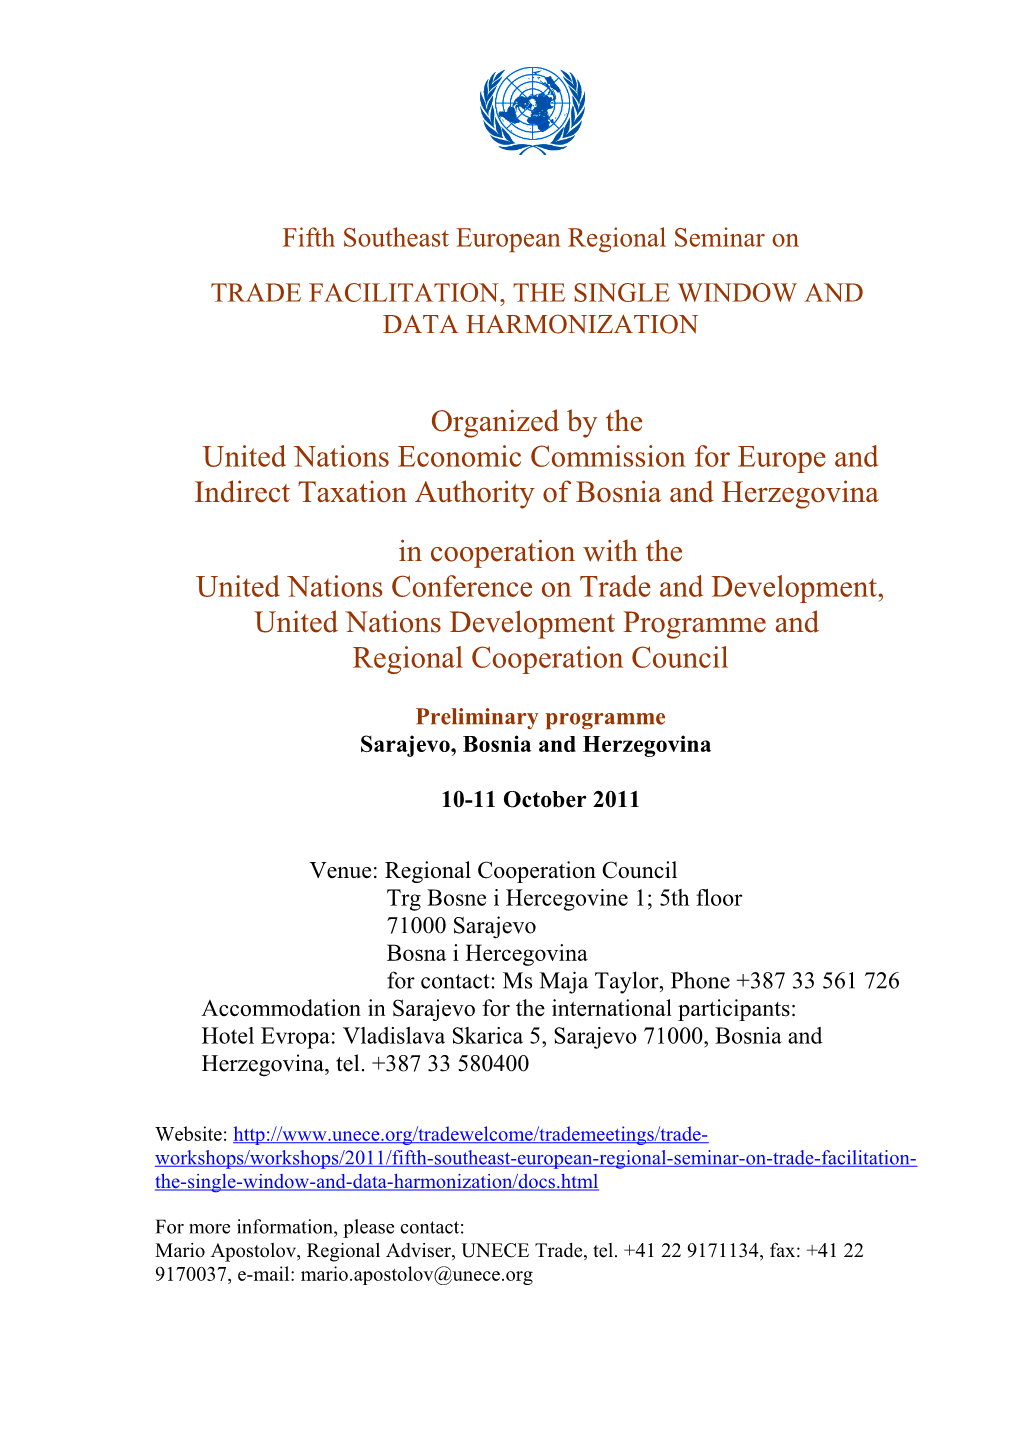 On 19-20 October 2005, We Organized a Workshop on WTO Accession, Trade and Transit Facilitation